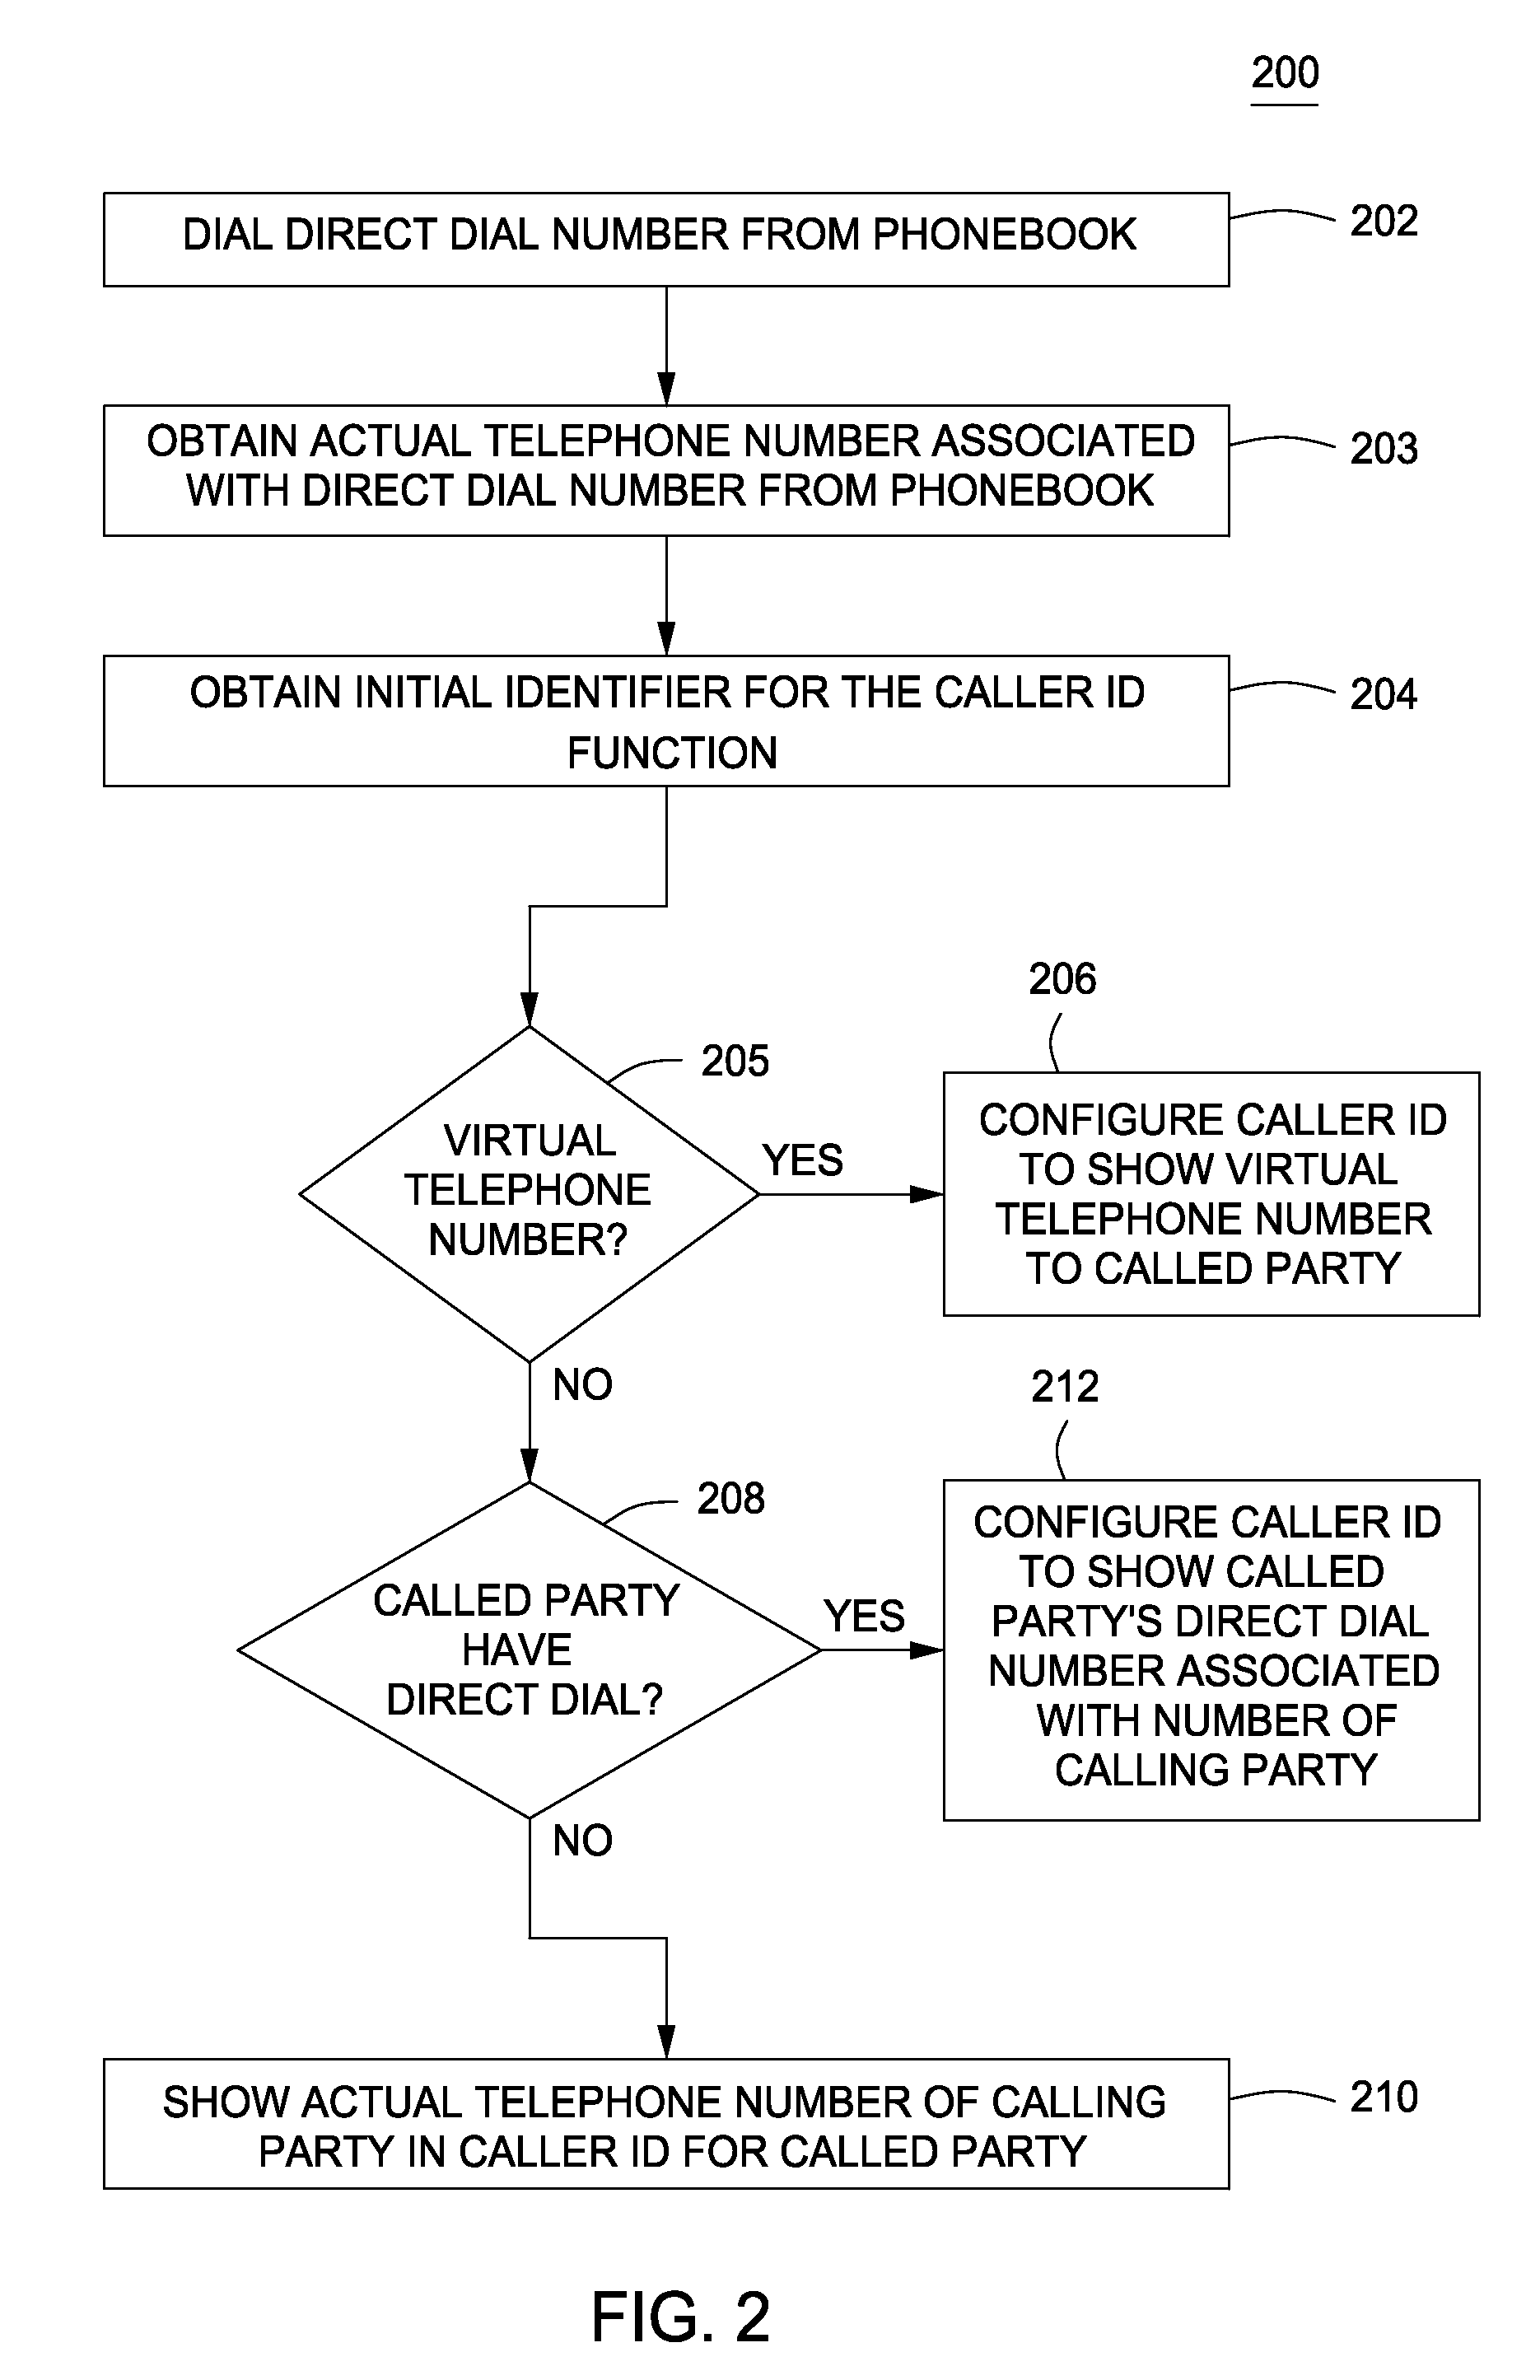 Method And Apparatus For Providing An Identifier For A Caller Id Function In A Telecommunication System